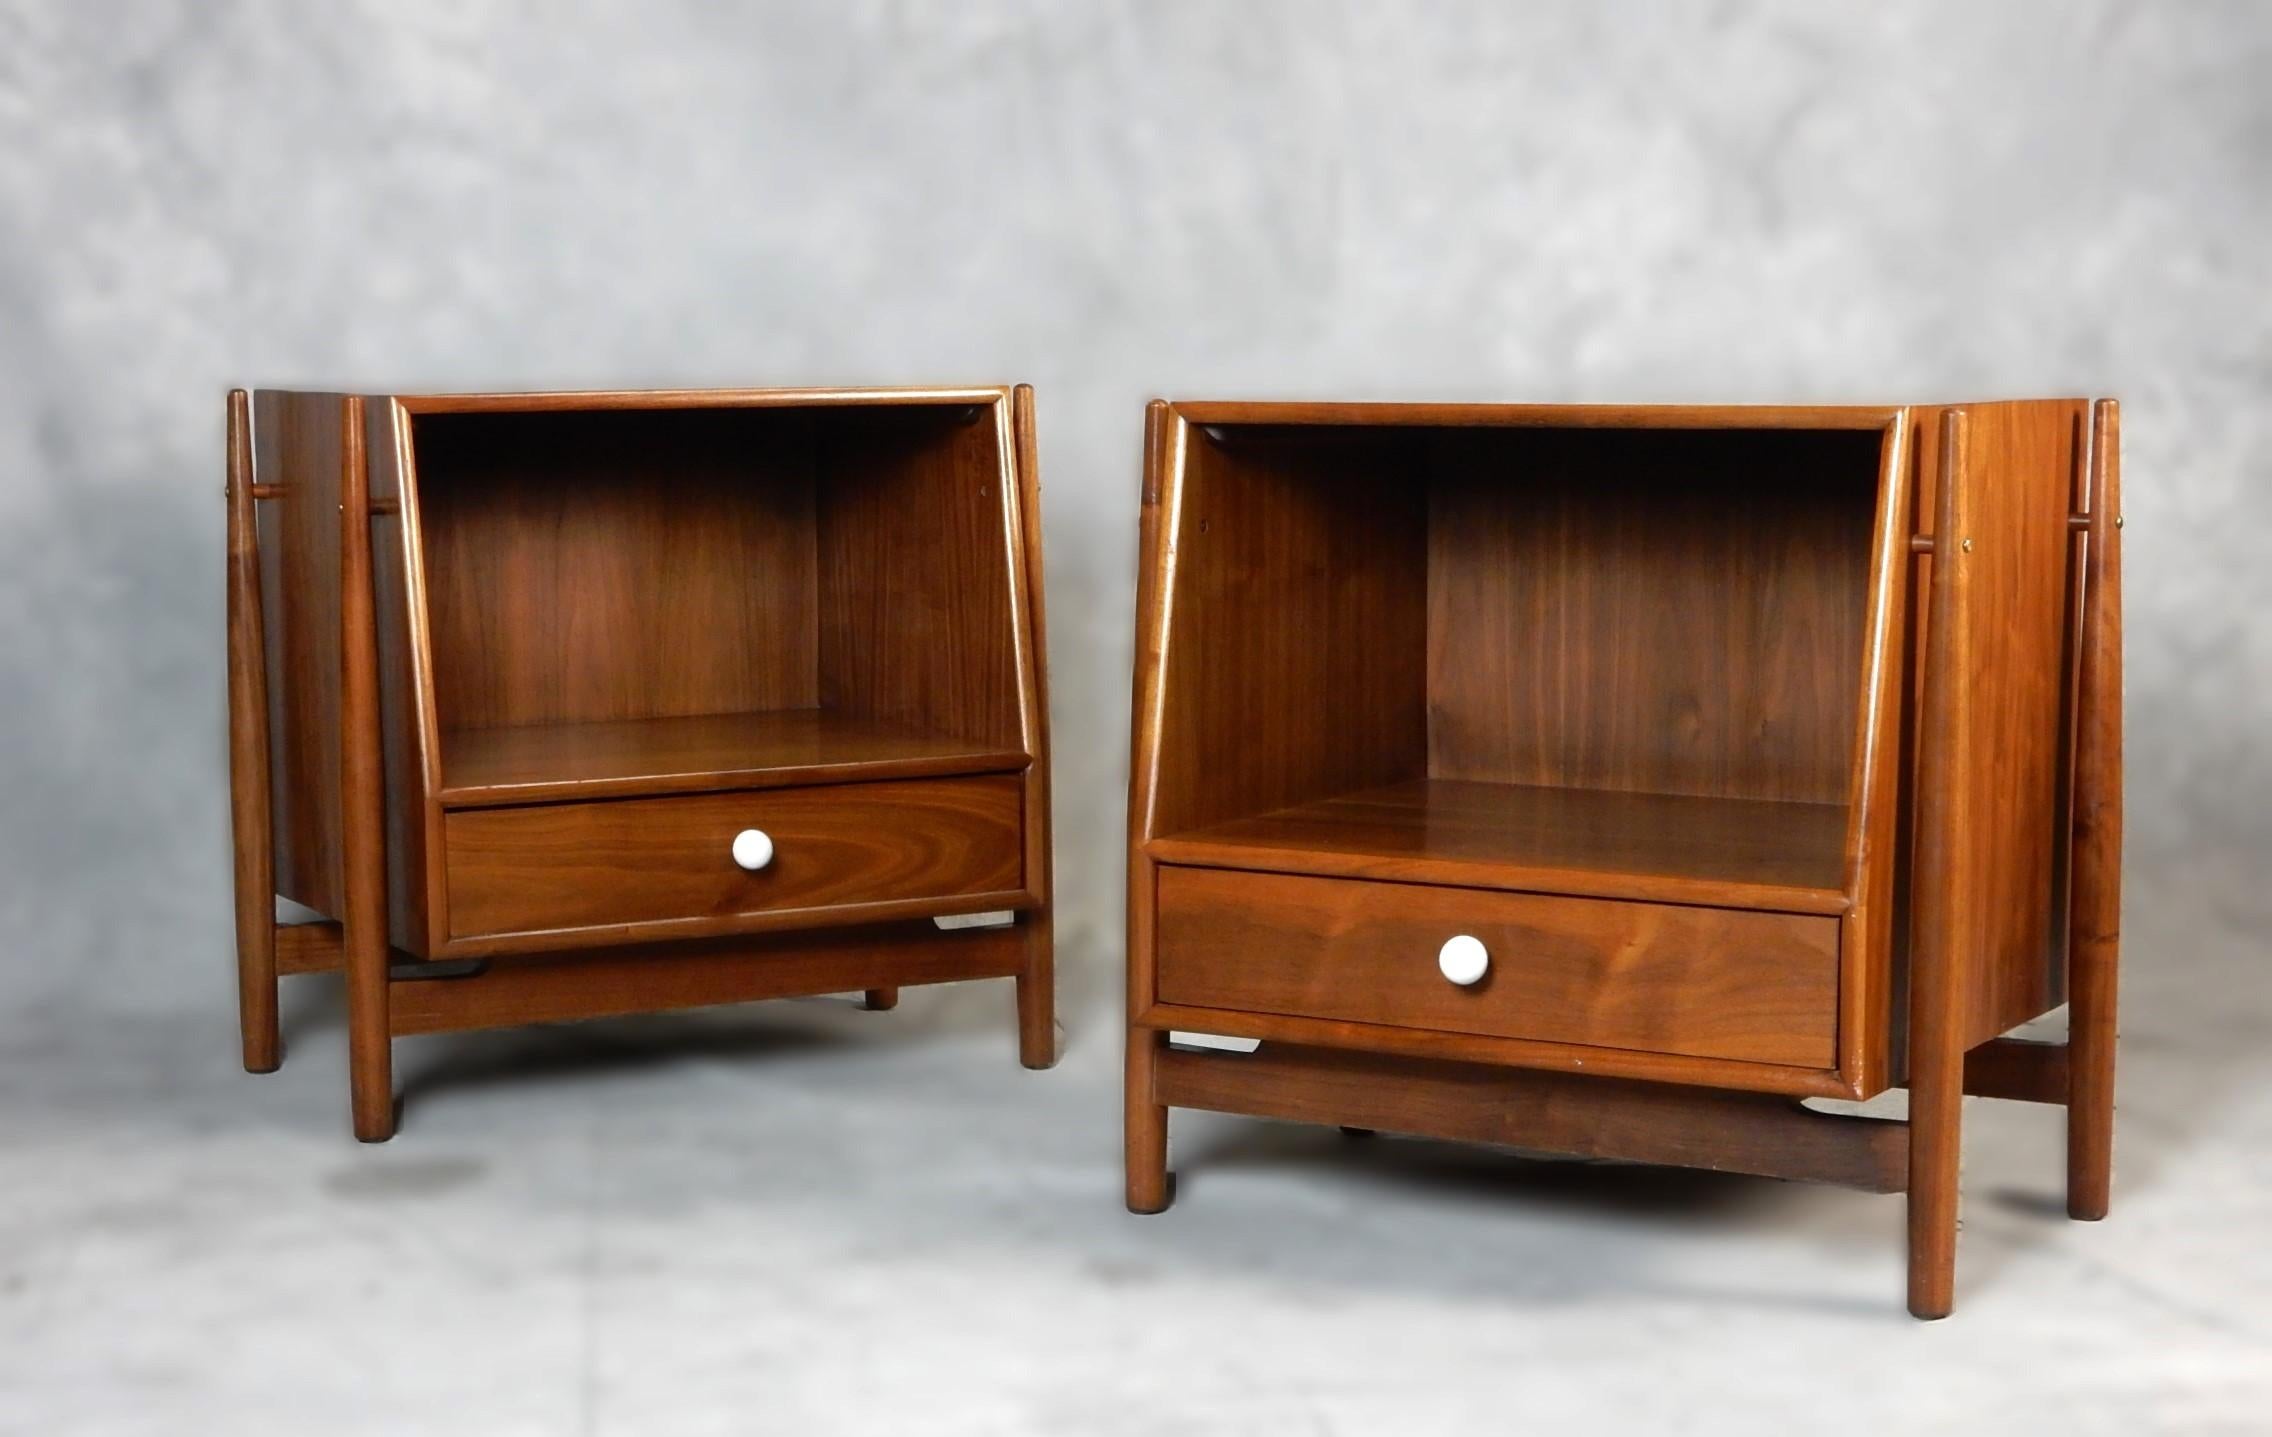 A pair of Mid-Century Modern nightstands designed by Kipp Stewart & Stewart MacDougall for Drexel’s ‘Declaration’ line, circa 1960s. 
Single lower drawer with iconic porcelain ball pull and a large open space to store books etc.
The geometric cases